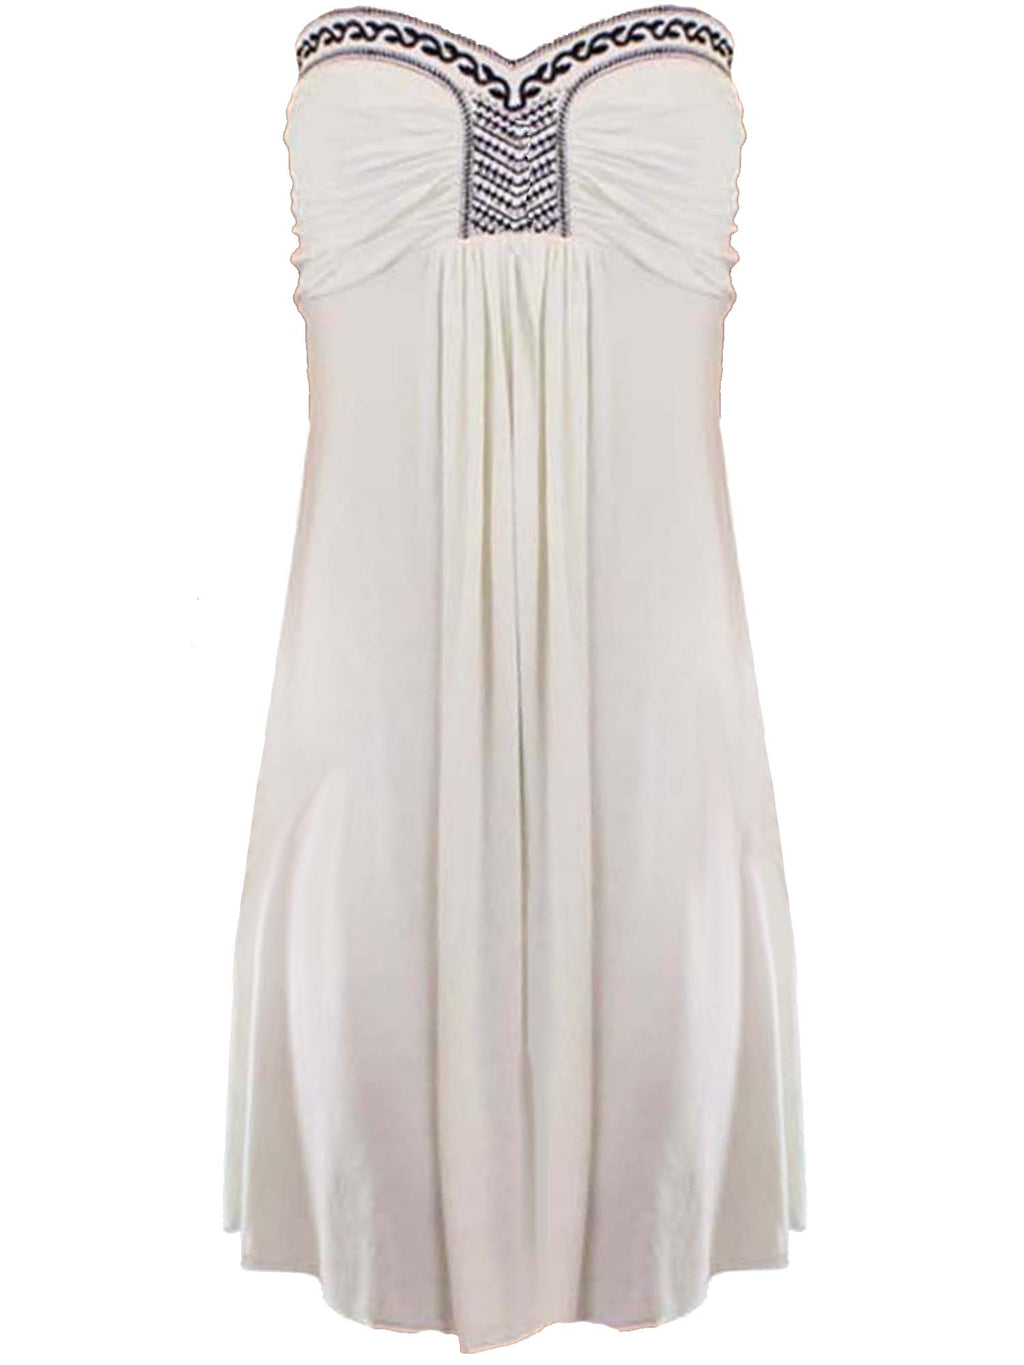 White Strapless Dress Beach Cover-Up With Embroidery